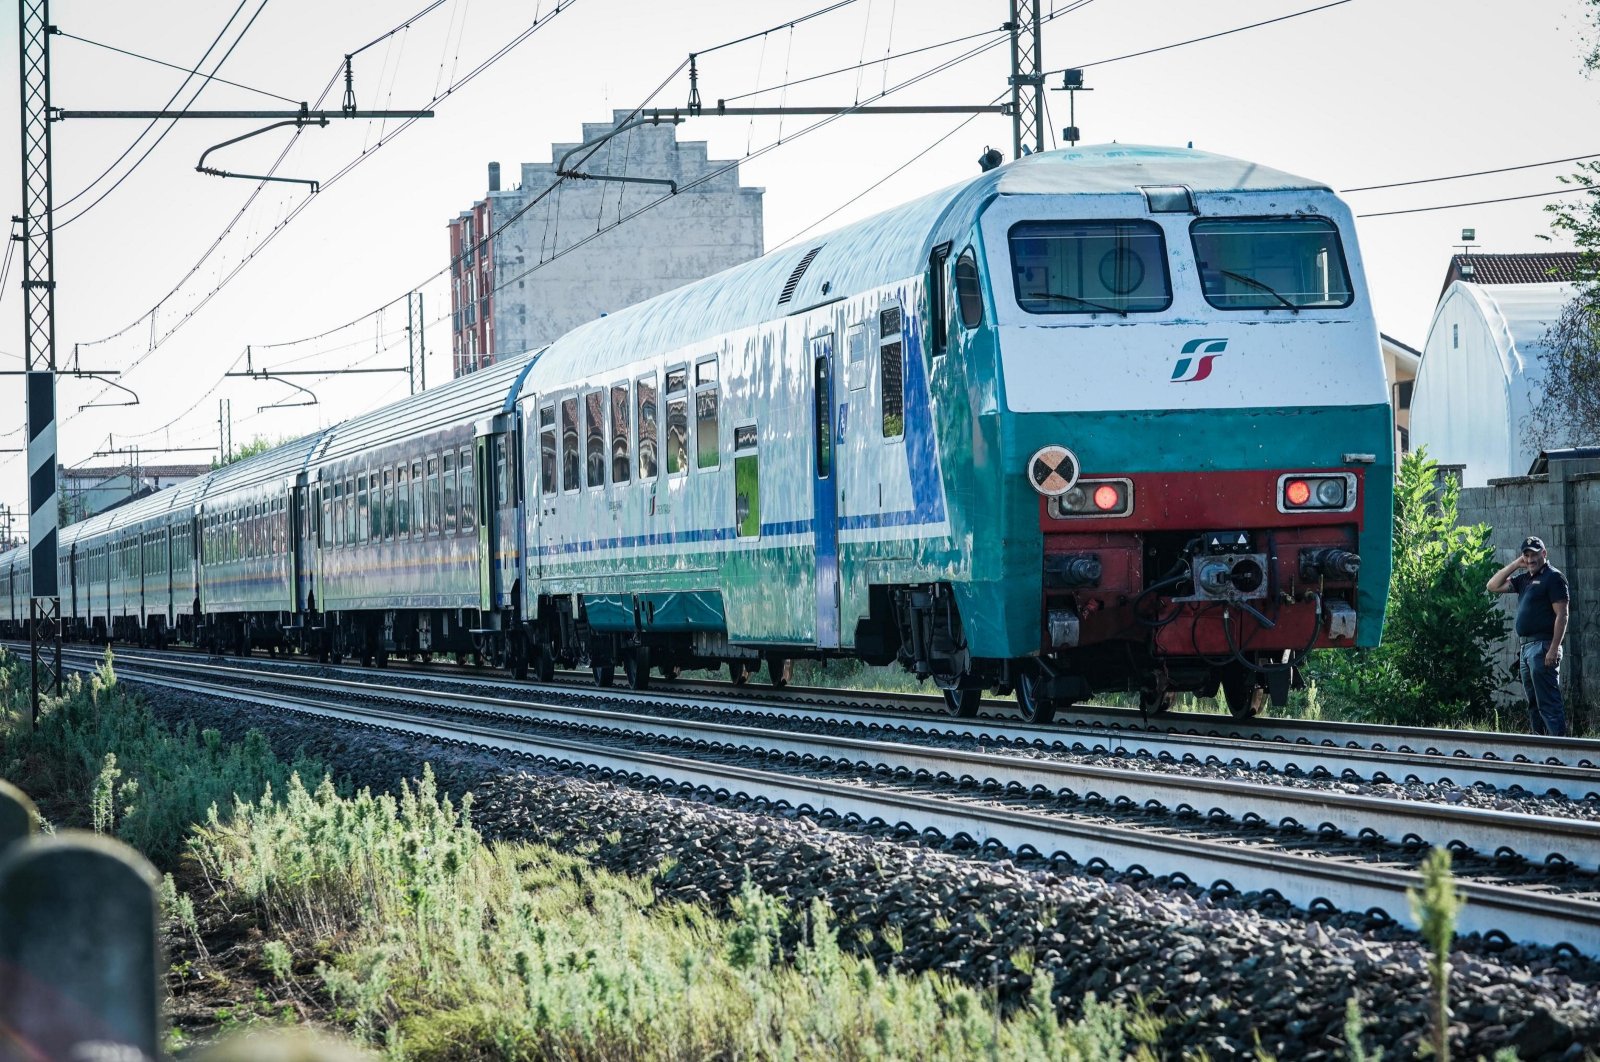 5 rail maintenance workers killed in Italy train accident